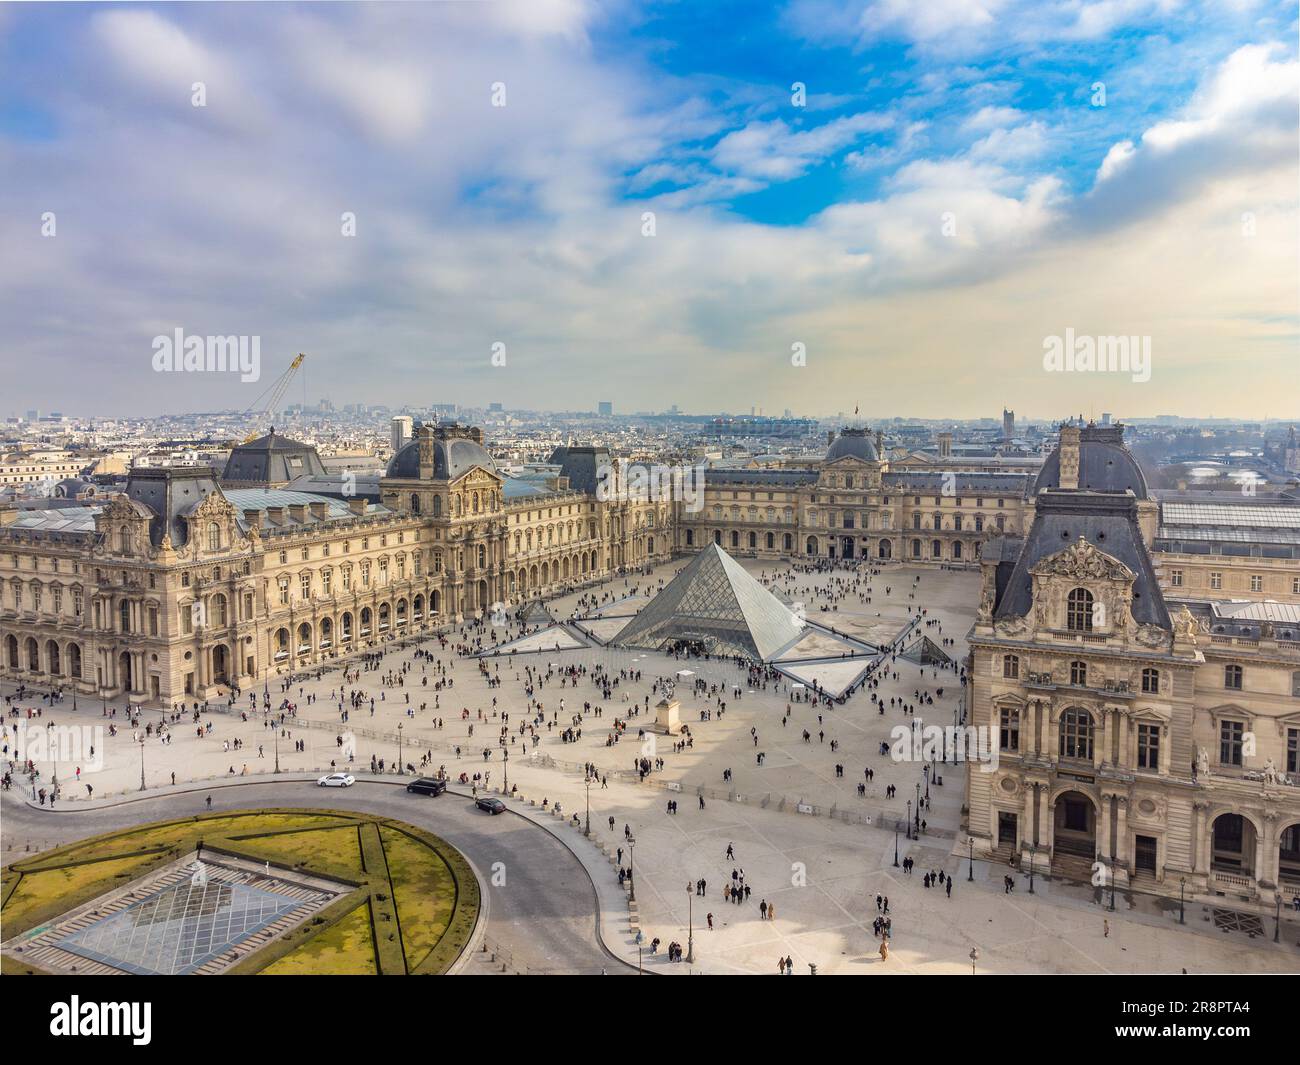 Aerial drone view of the Louvre palace and museum, one of the most iconic places in Paris, France Stock Photo